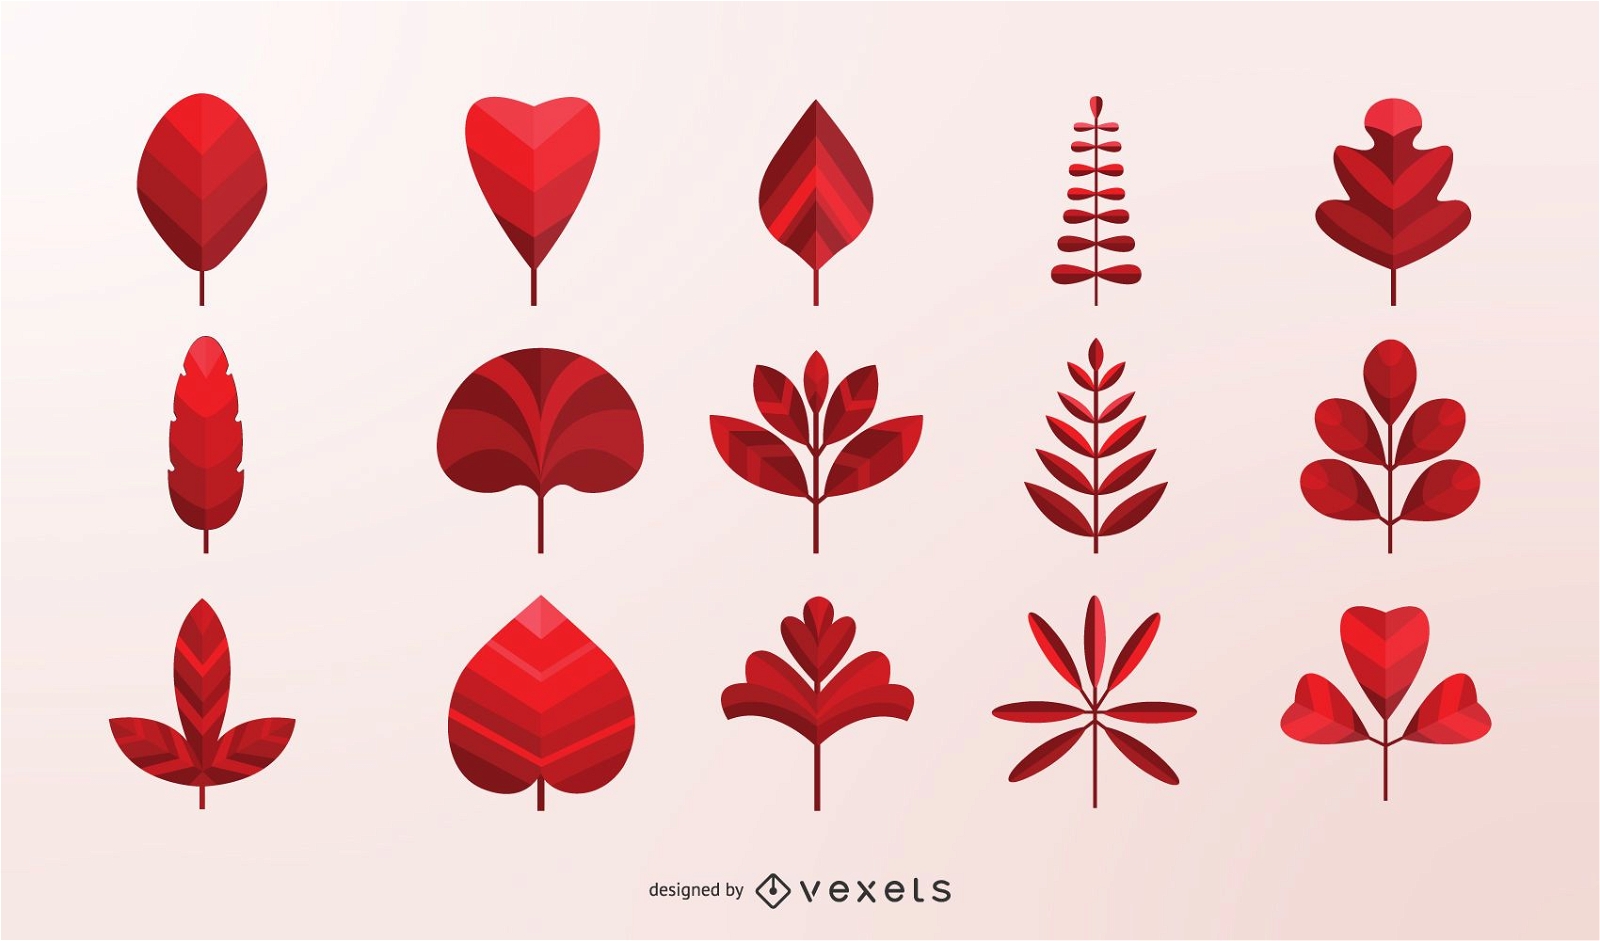 Autumn Leaves Vector Collection